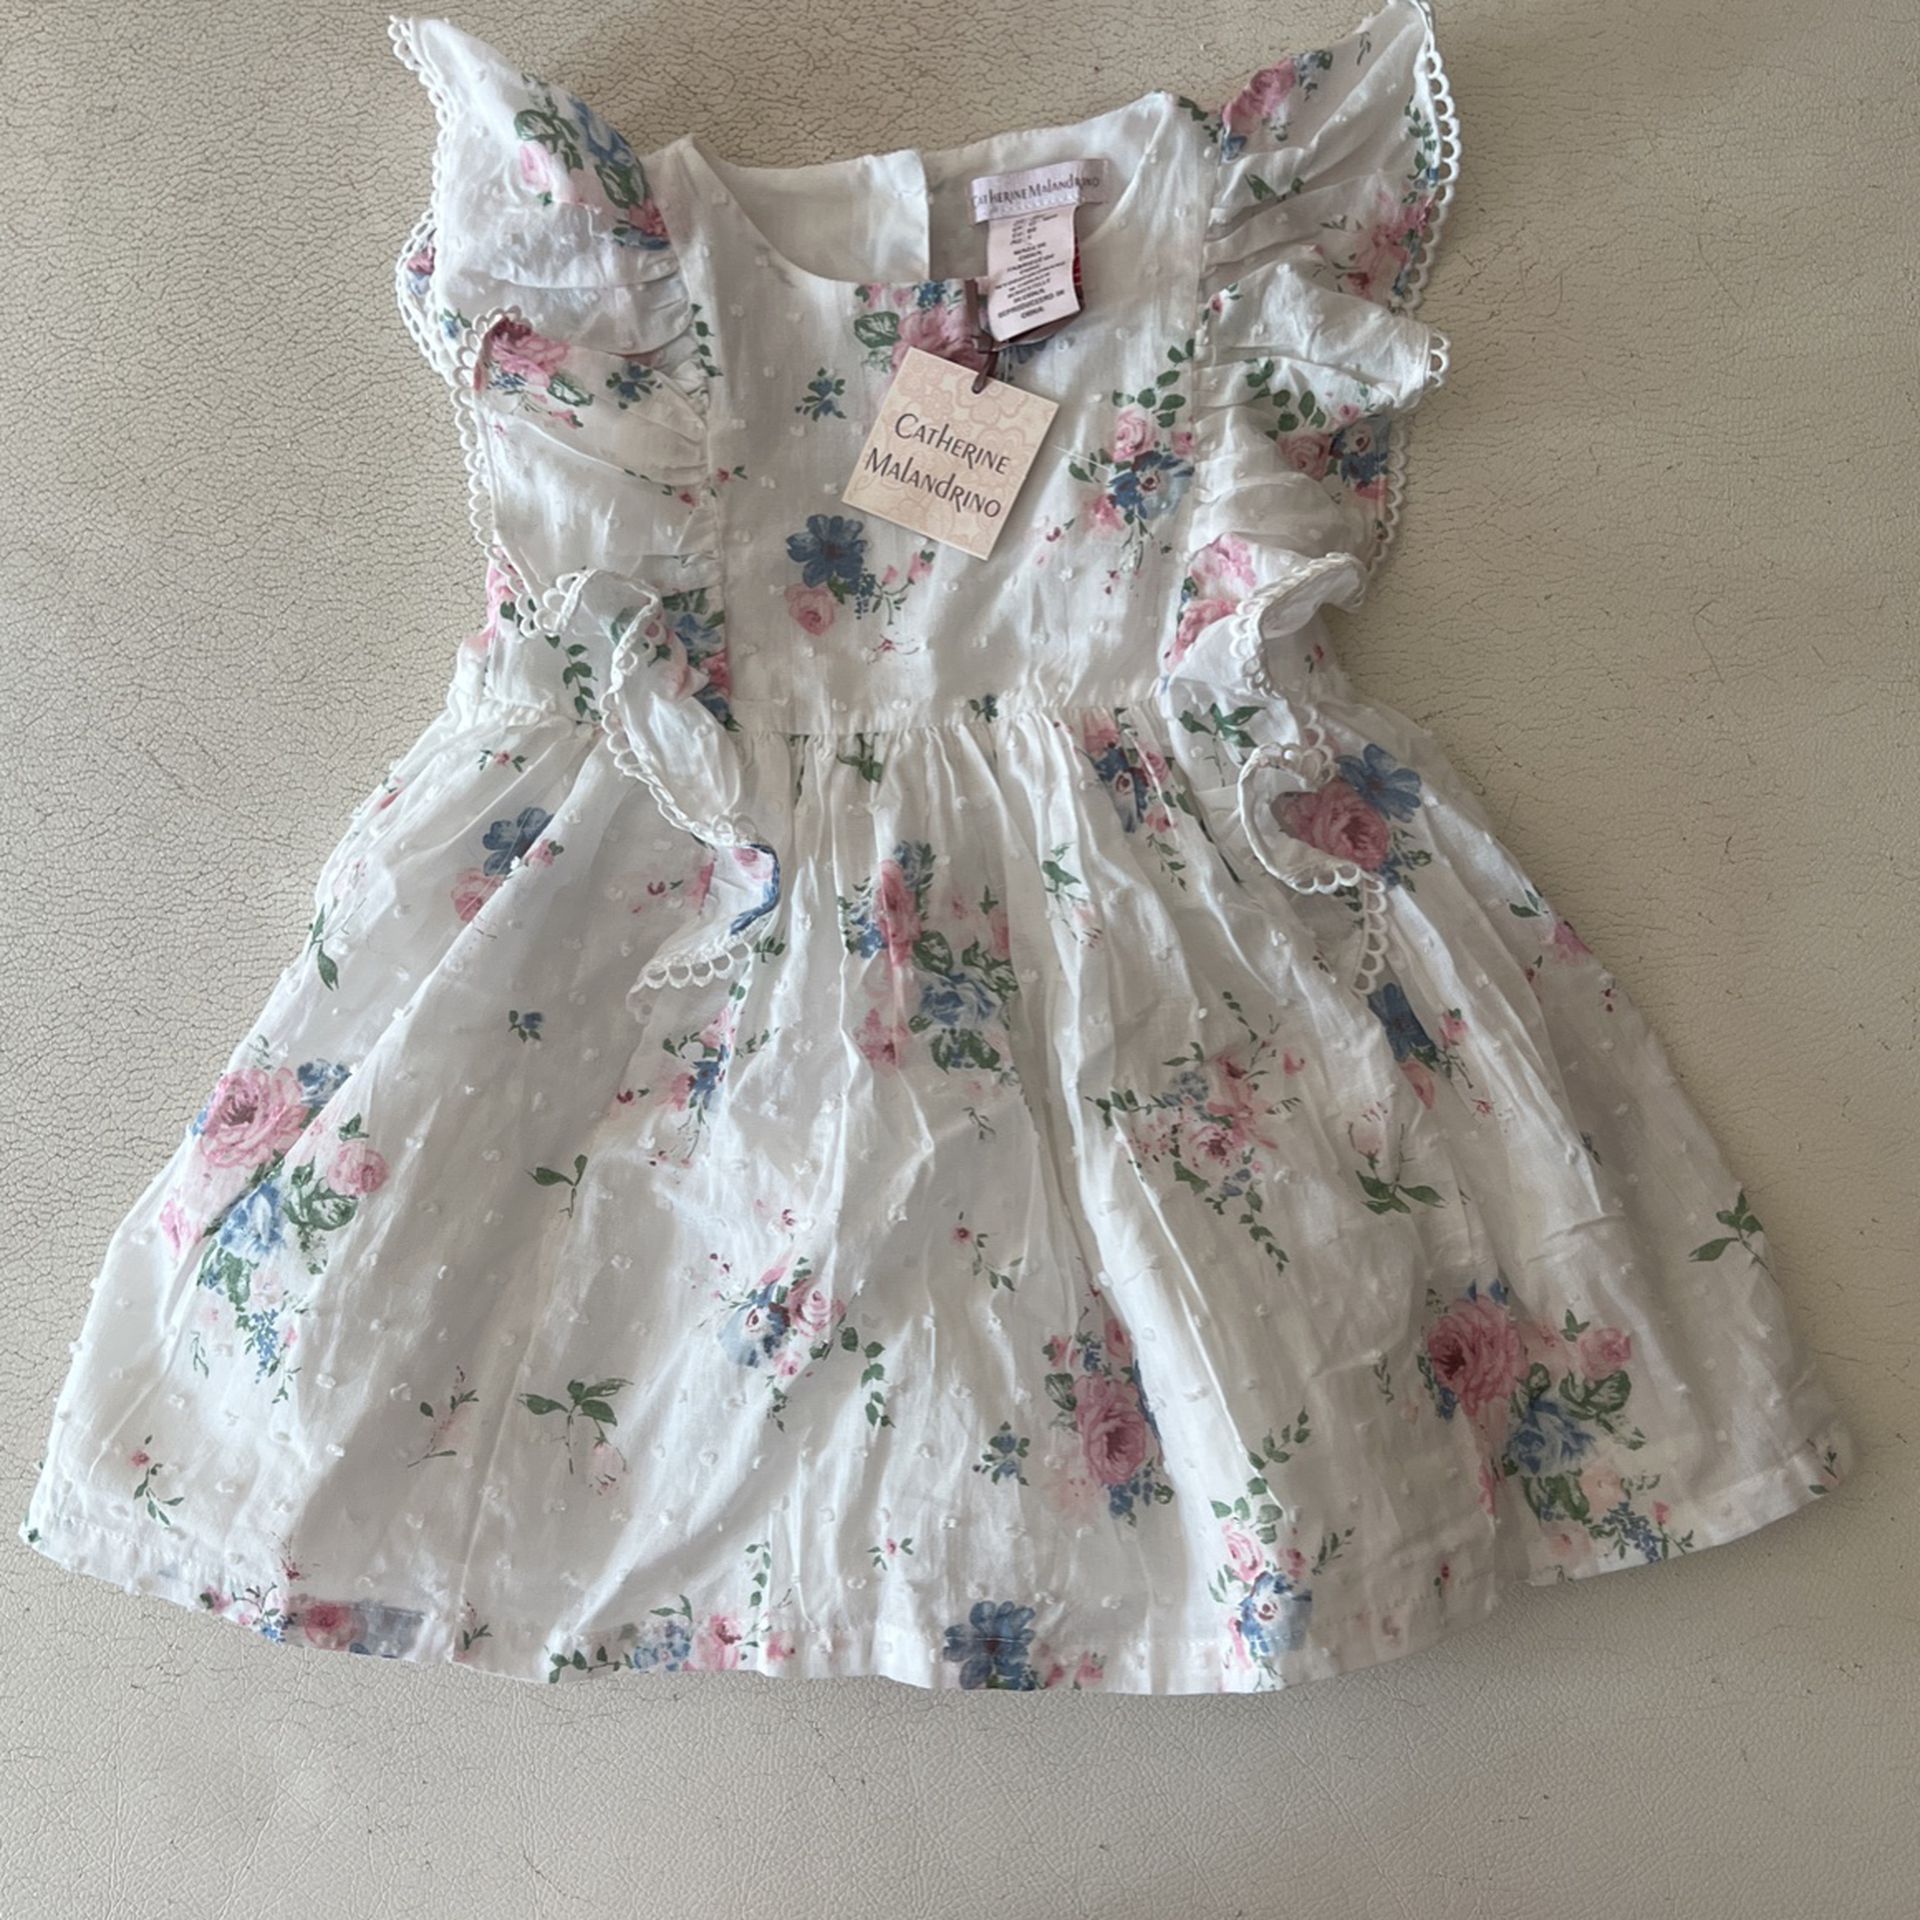 NEW Catherine Malandrino White Floral Ruffle Dress Infant Size 18 Months - NEW W/tags